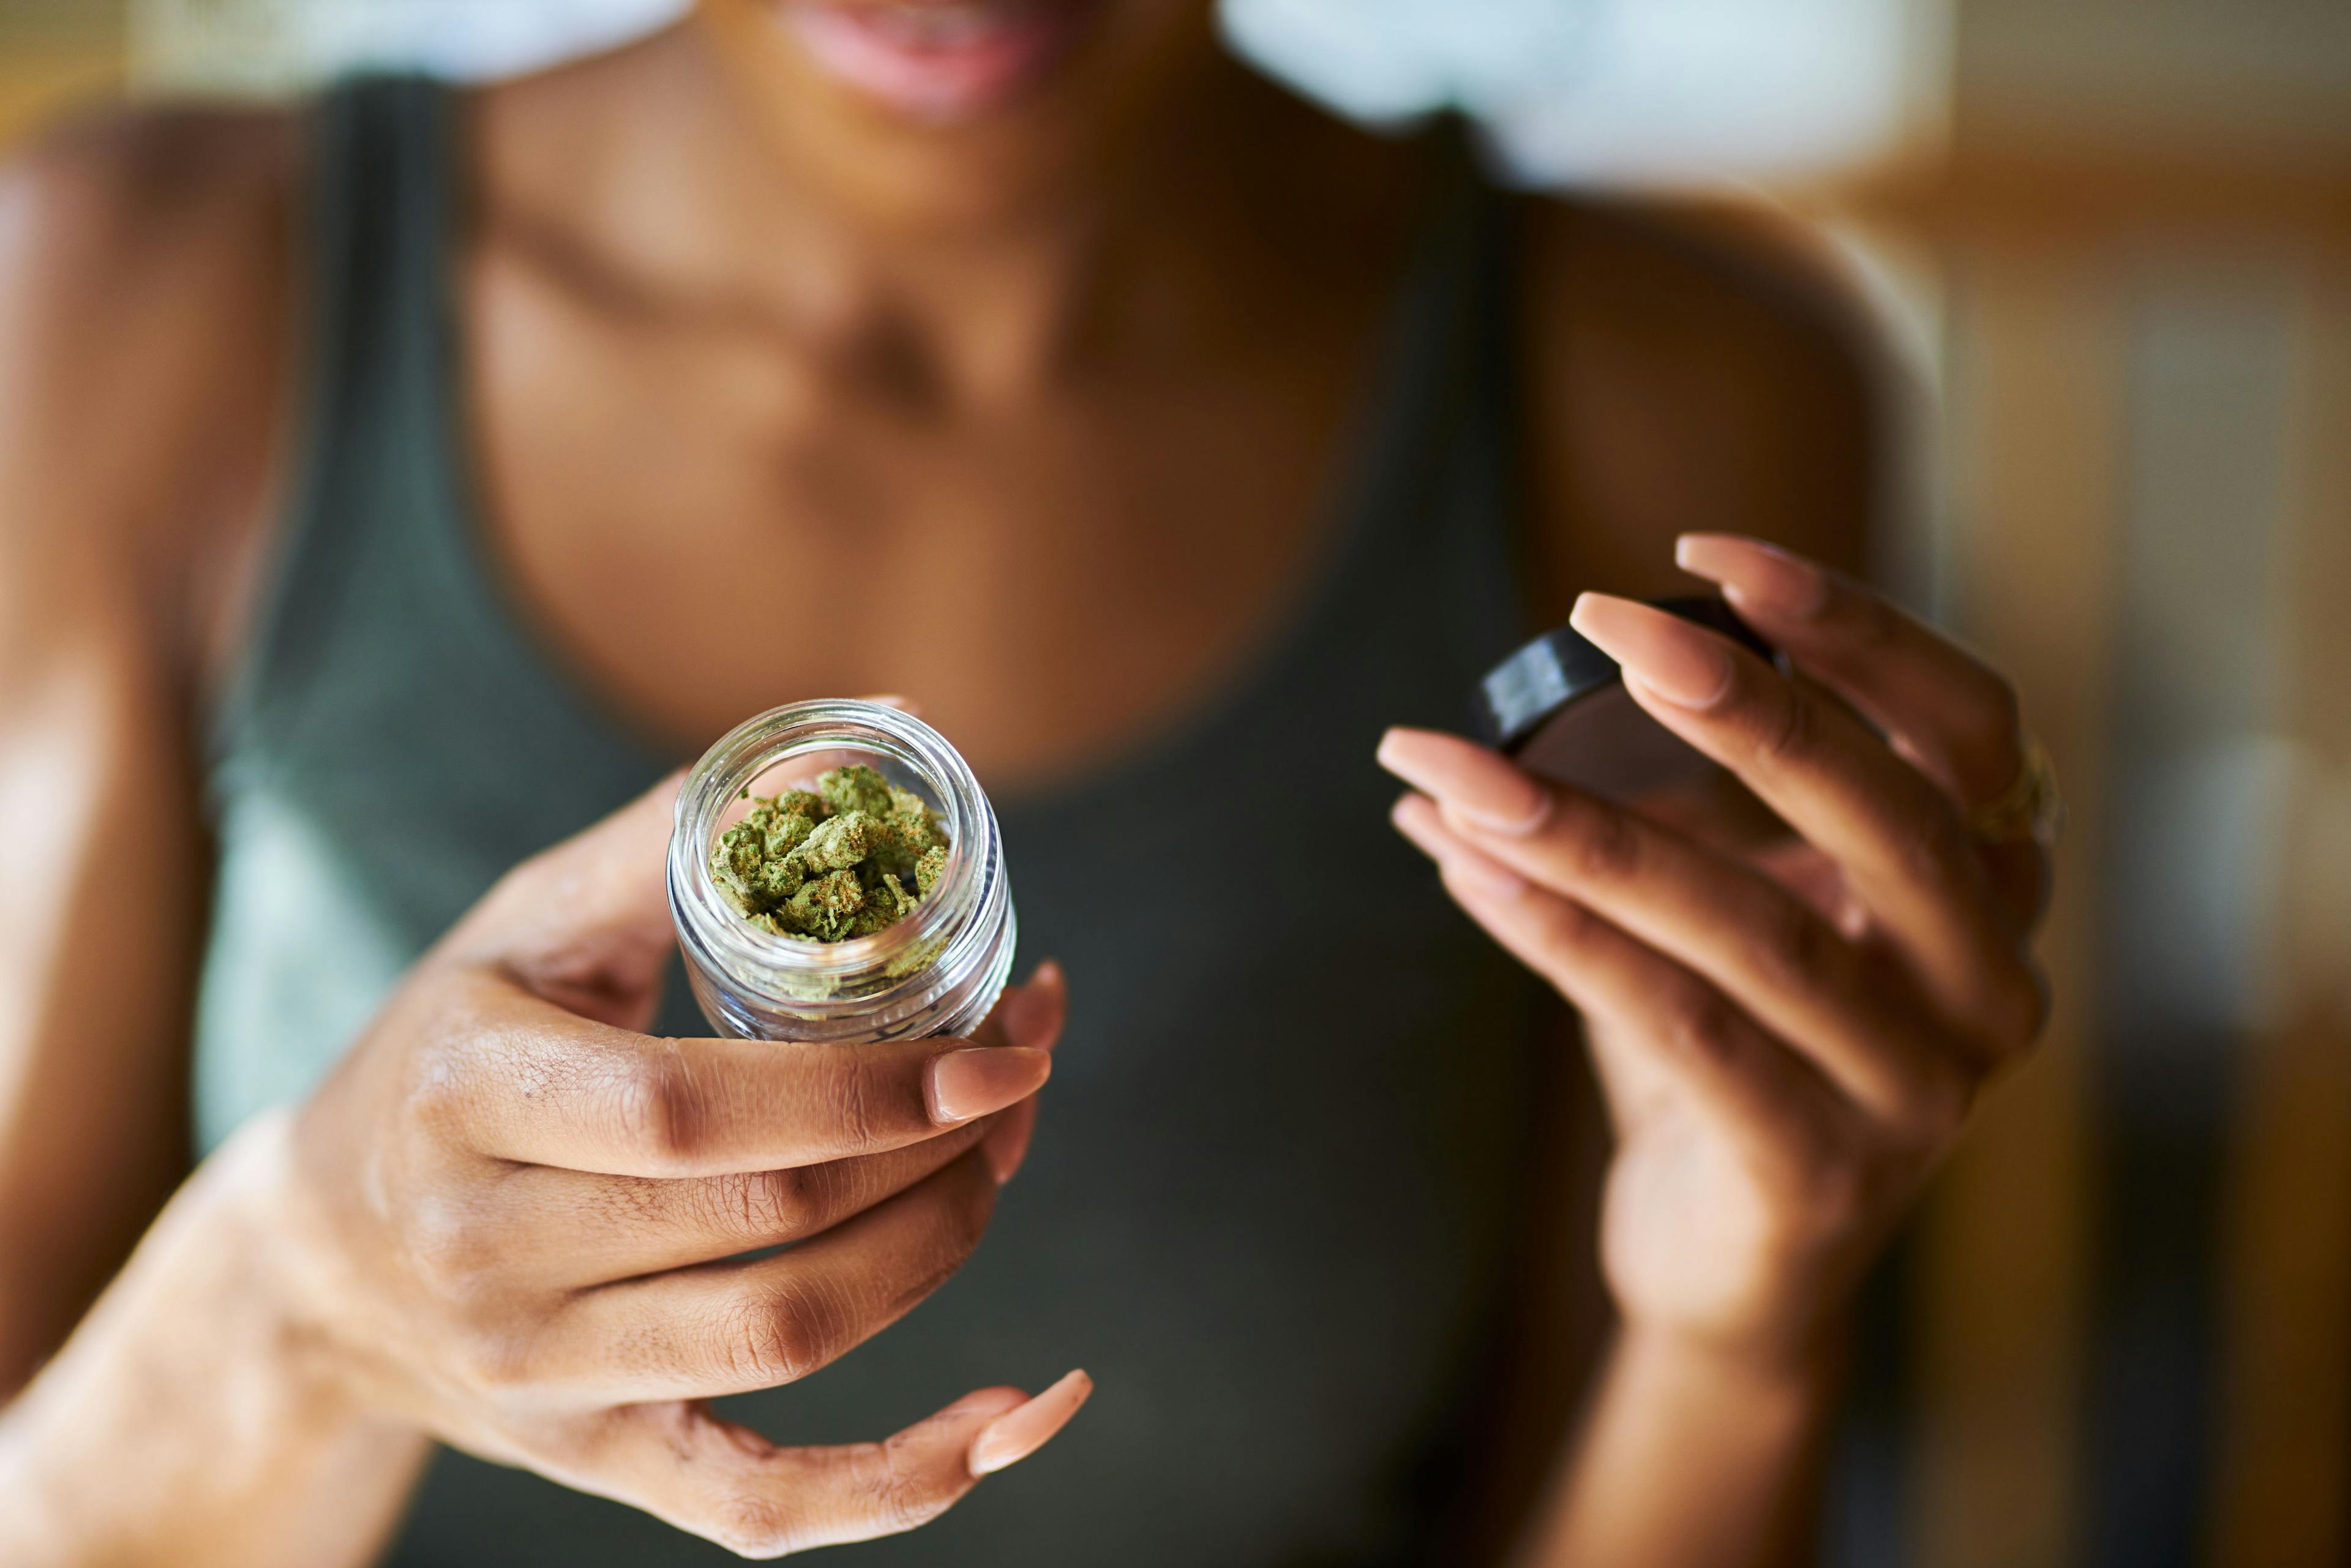 More Women Are Using Cannabis to Manage Menopause Symptoms